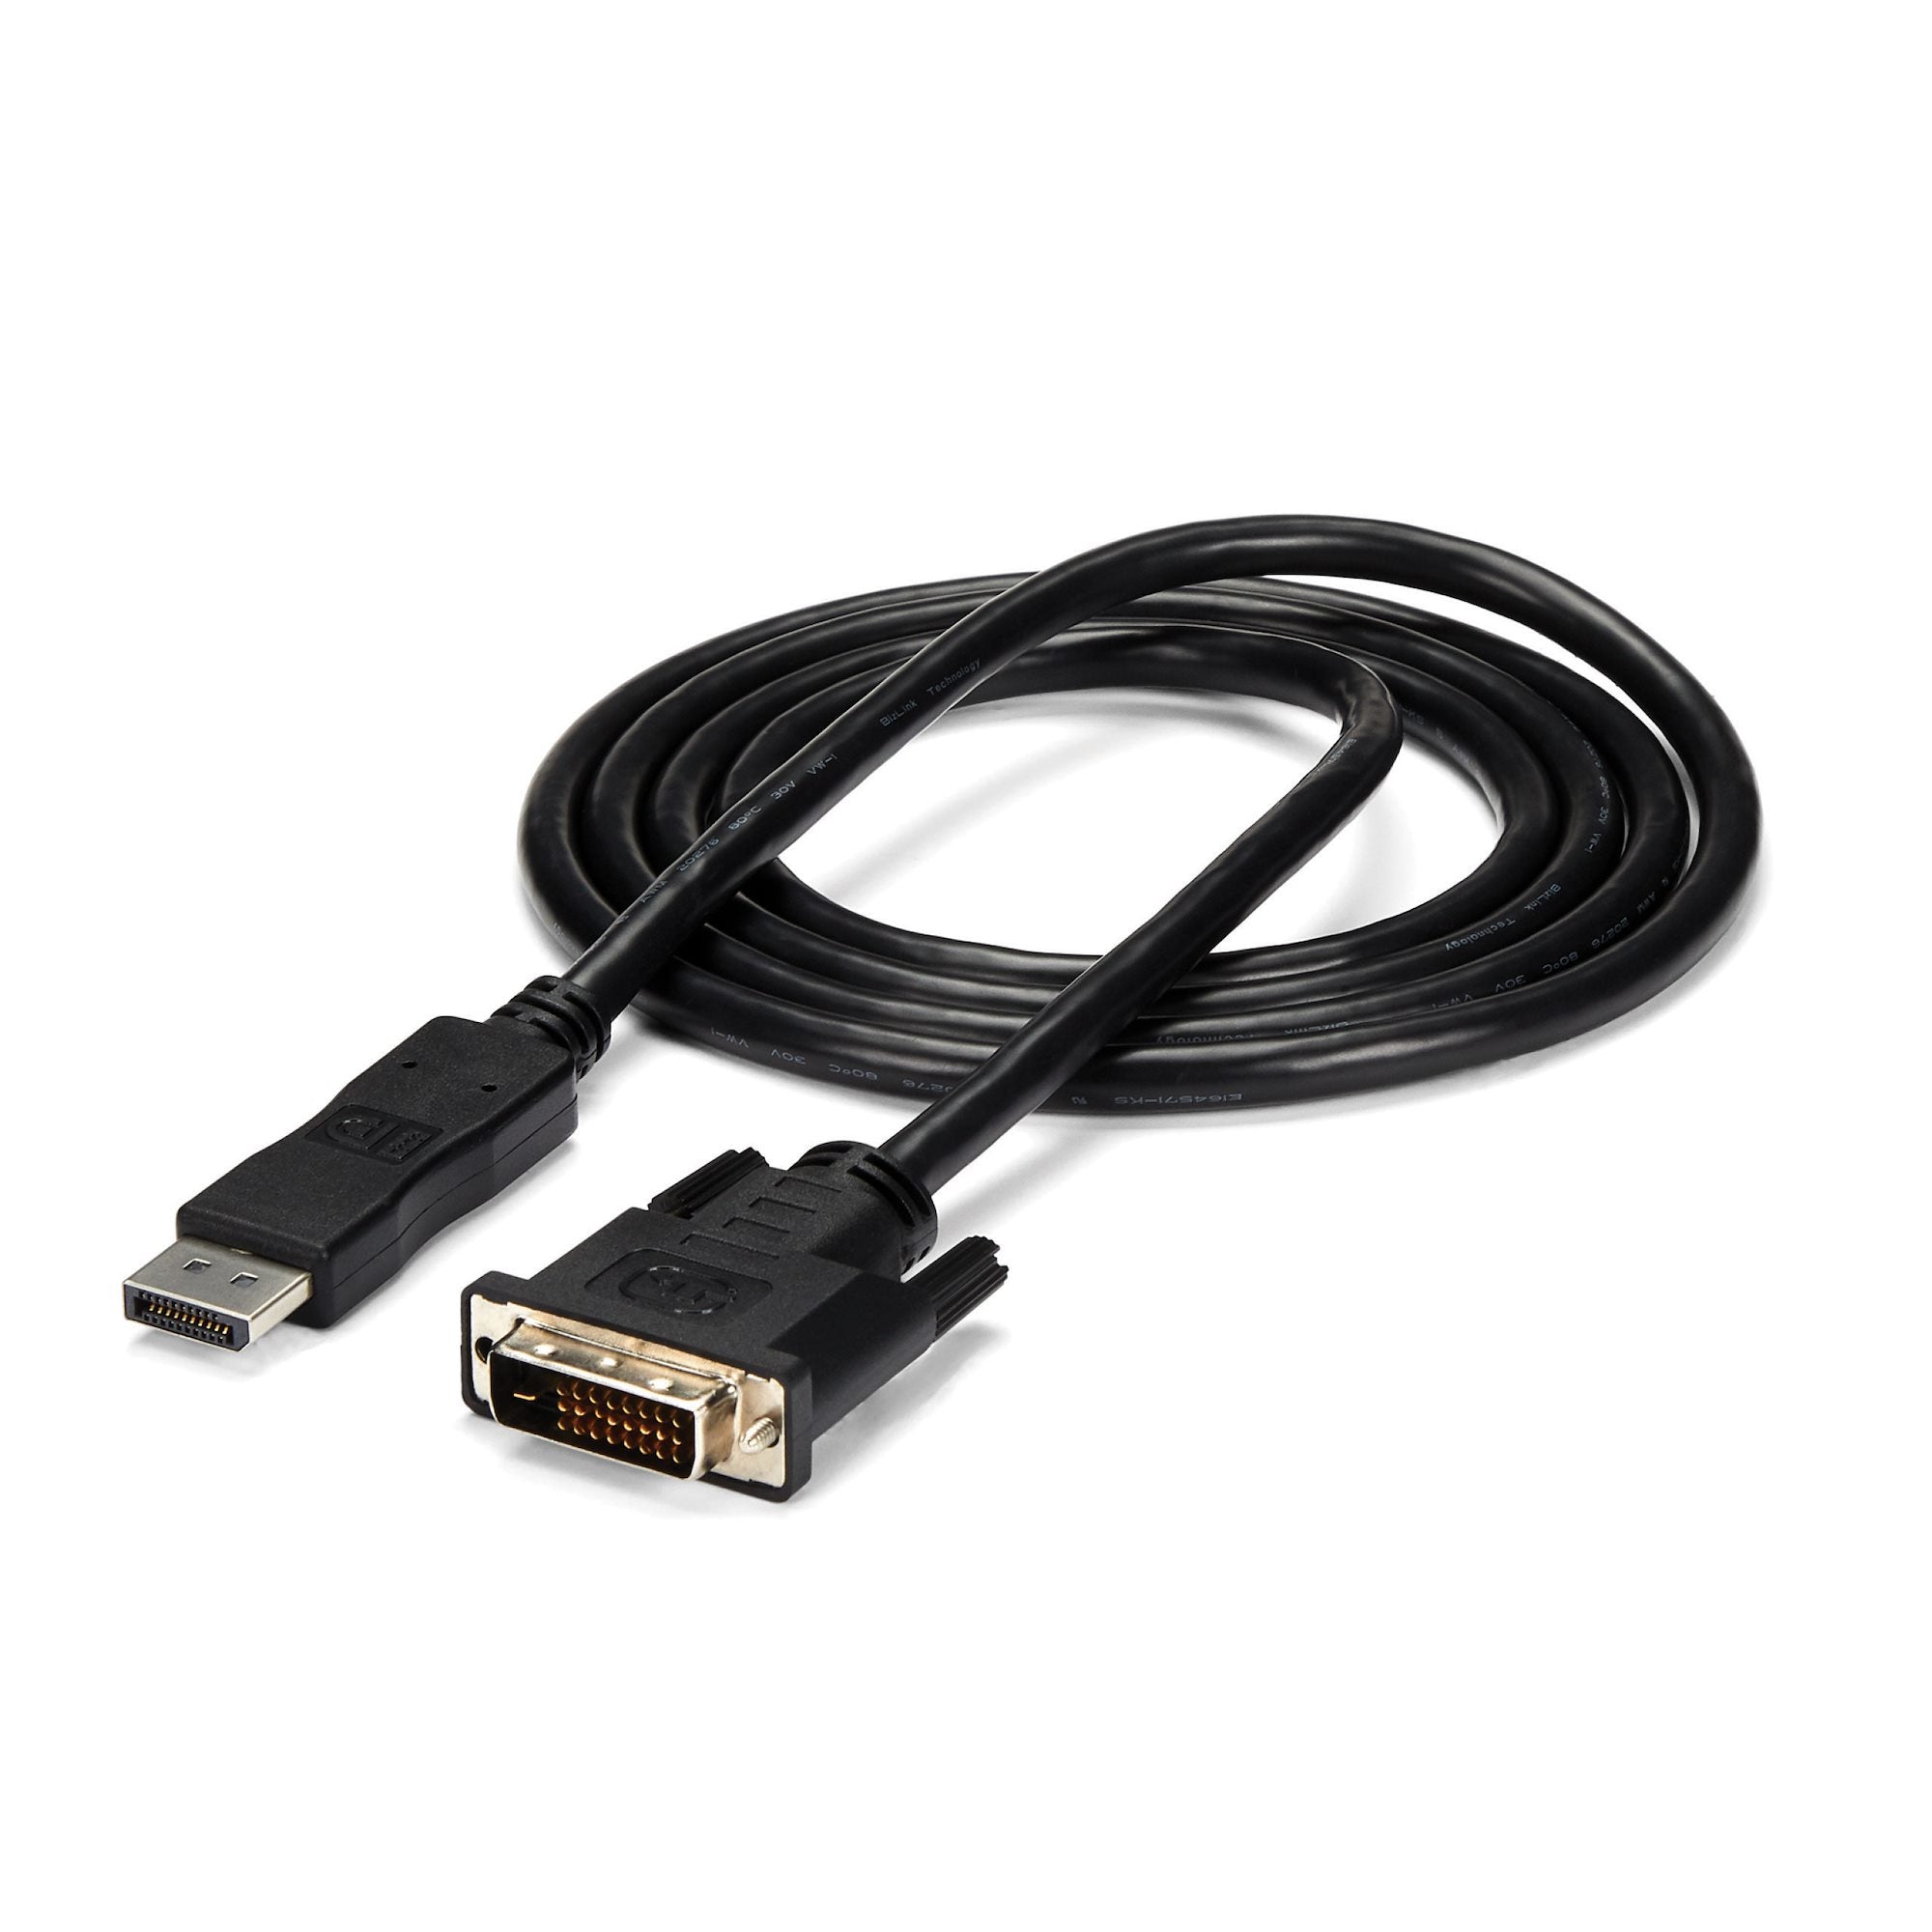 StarTech.com 6ft (1.8m) DisplayPort to DVI Cable, DisplayPort to DVI Adapter Cable, Passive DP to DVI-D Video Converter, 1080p - Replaced by DP2DVI2MM6